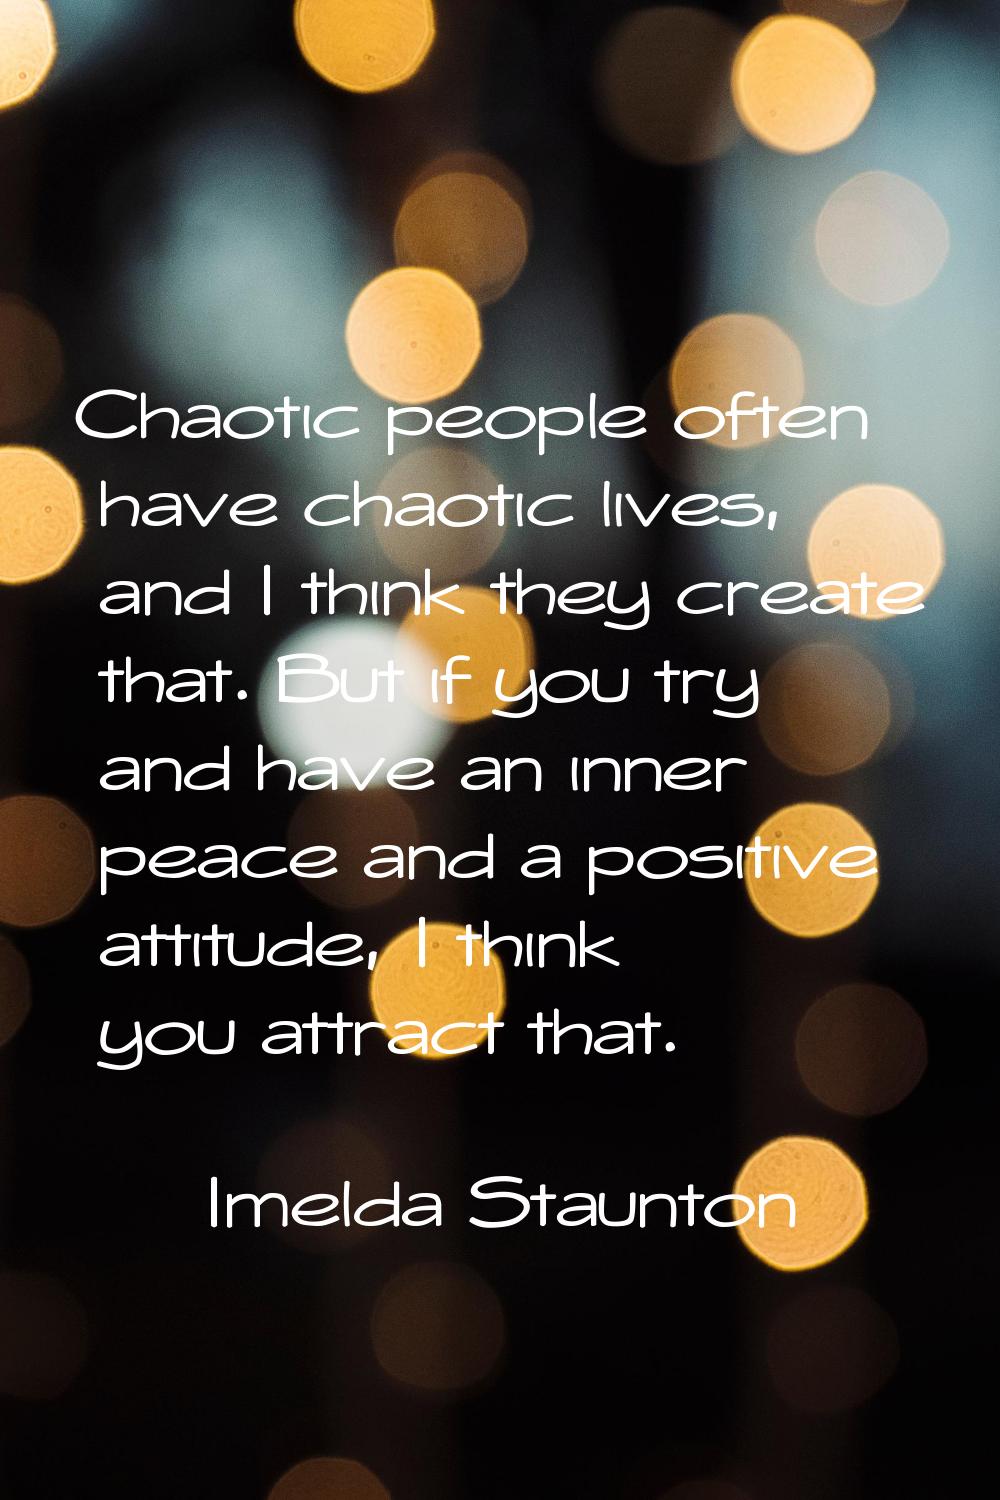 Chaotic people often have chaotic lives, and I think they create that. But if you try and have an i